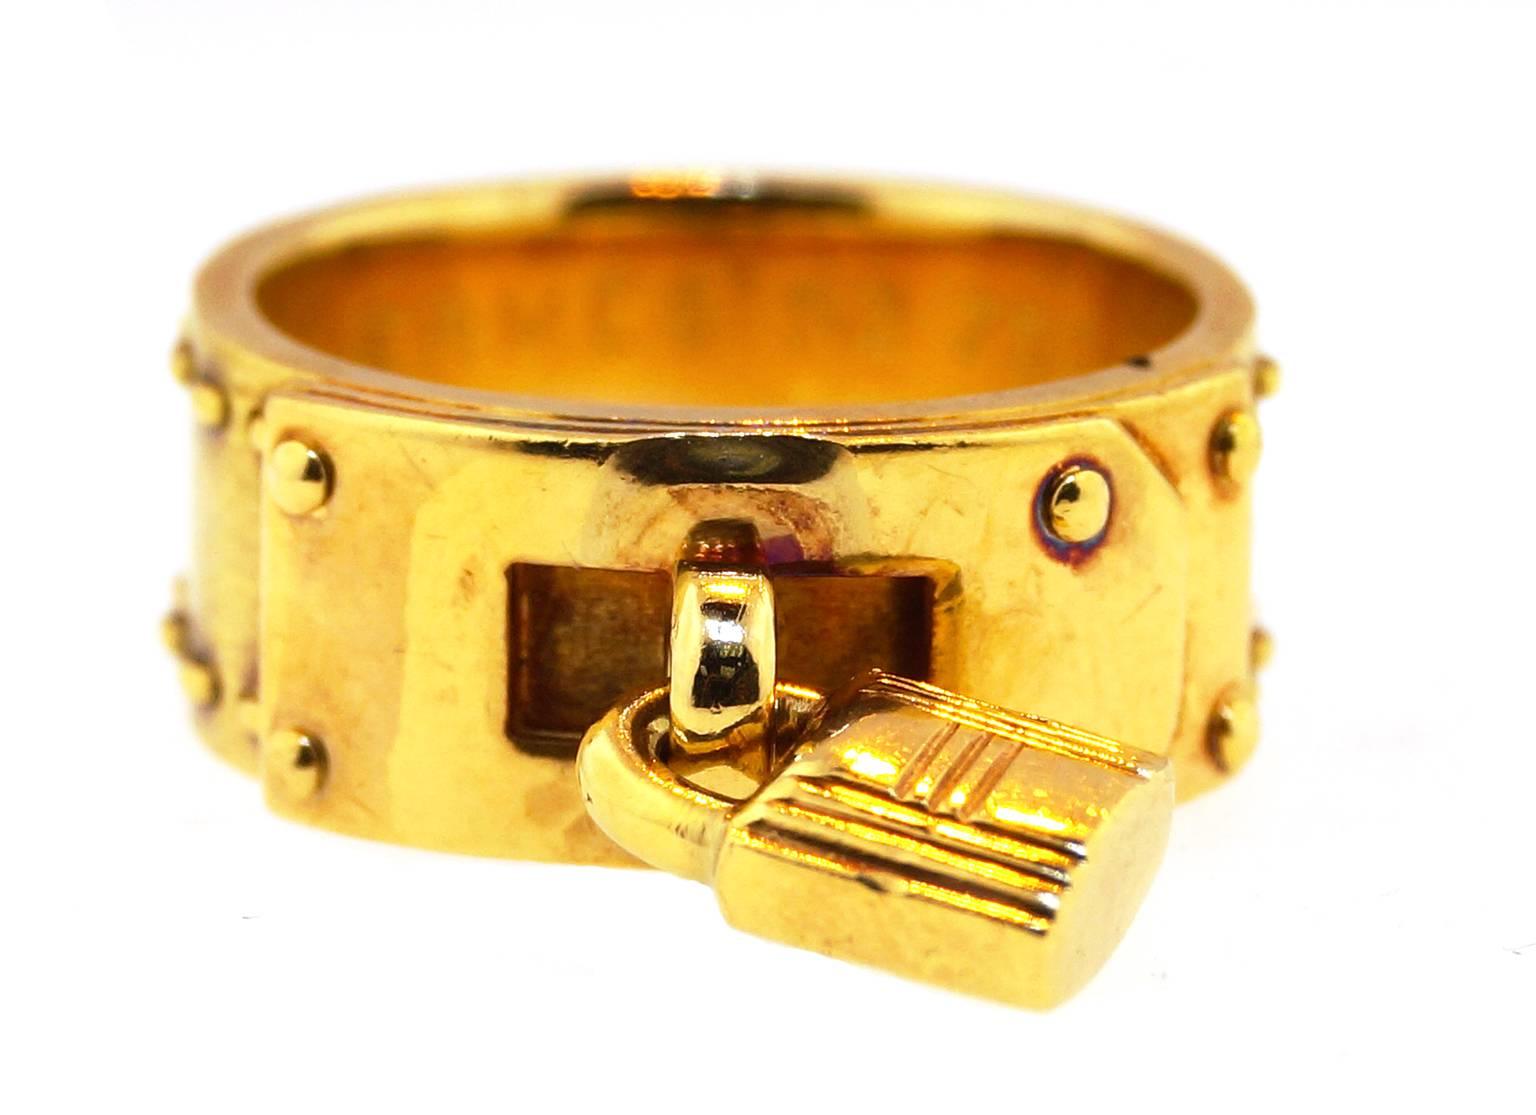 Gorgeous and iconic Hermes padlock ring in 18k gold. 
Designed in the 1970's this ring comes with it's original vintage Hermes box. Ring size 6.